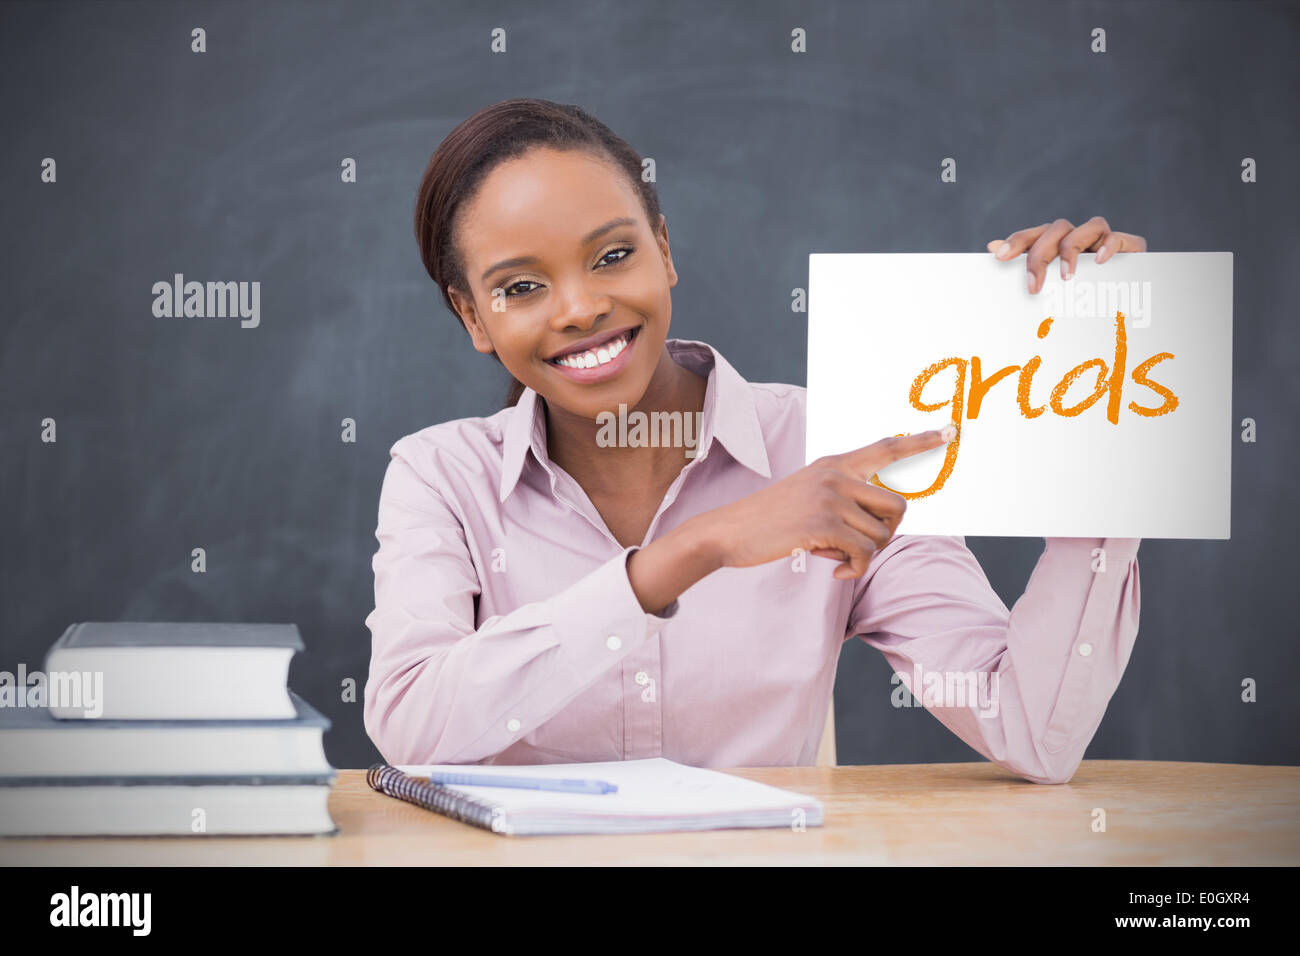 Happy teacher holding page showing grids Stock Photo